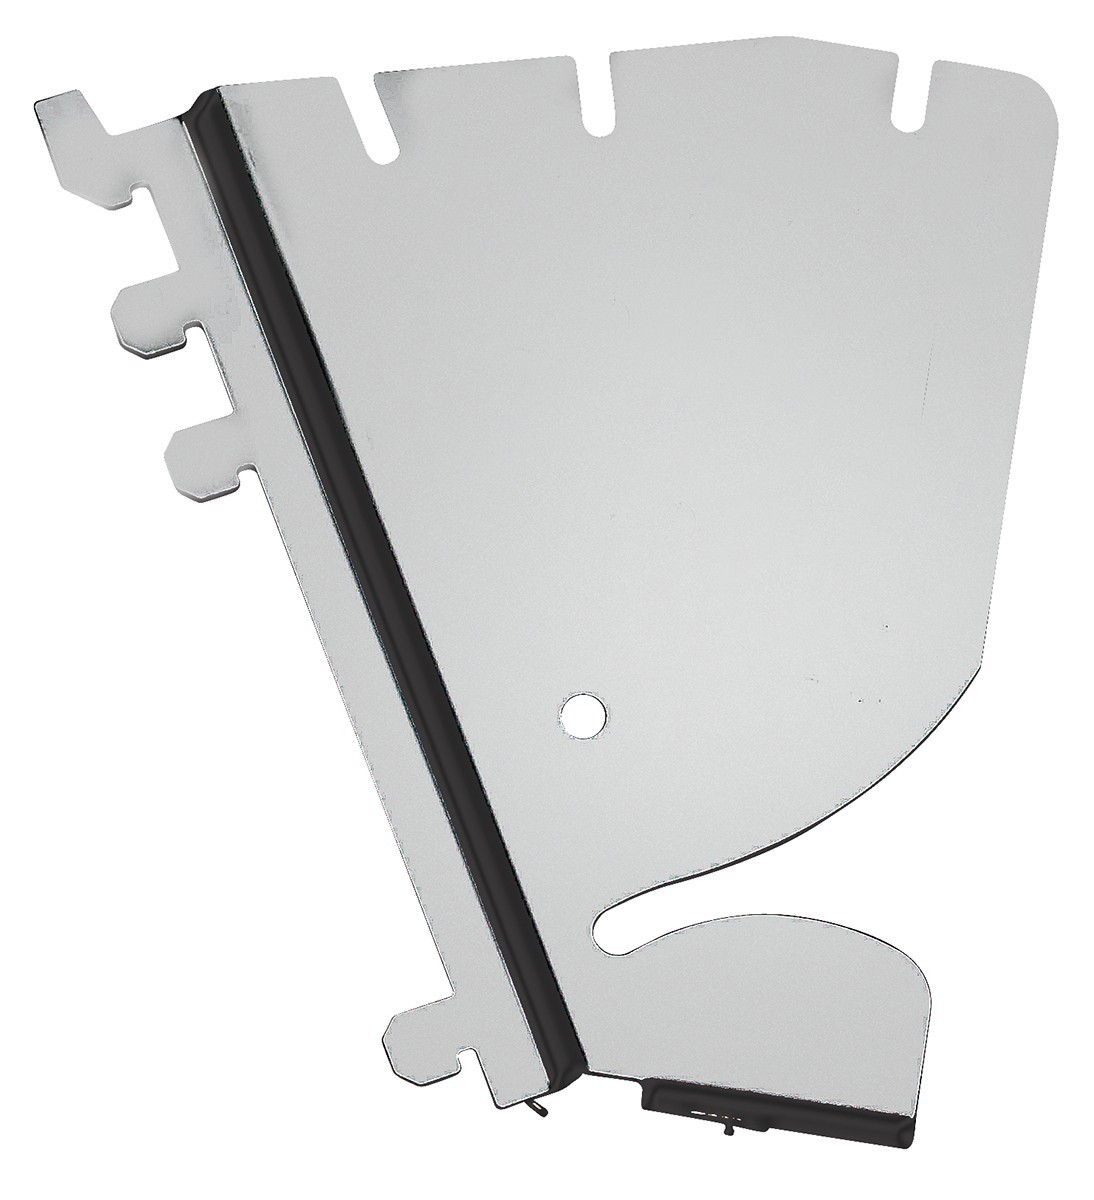 Quantum partition wall systems - hanging brackets 